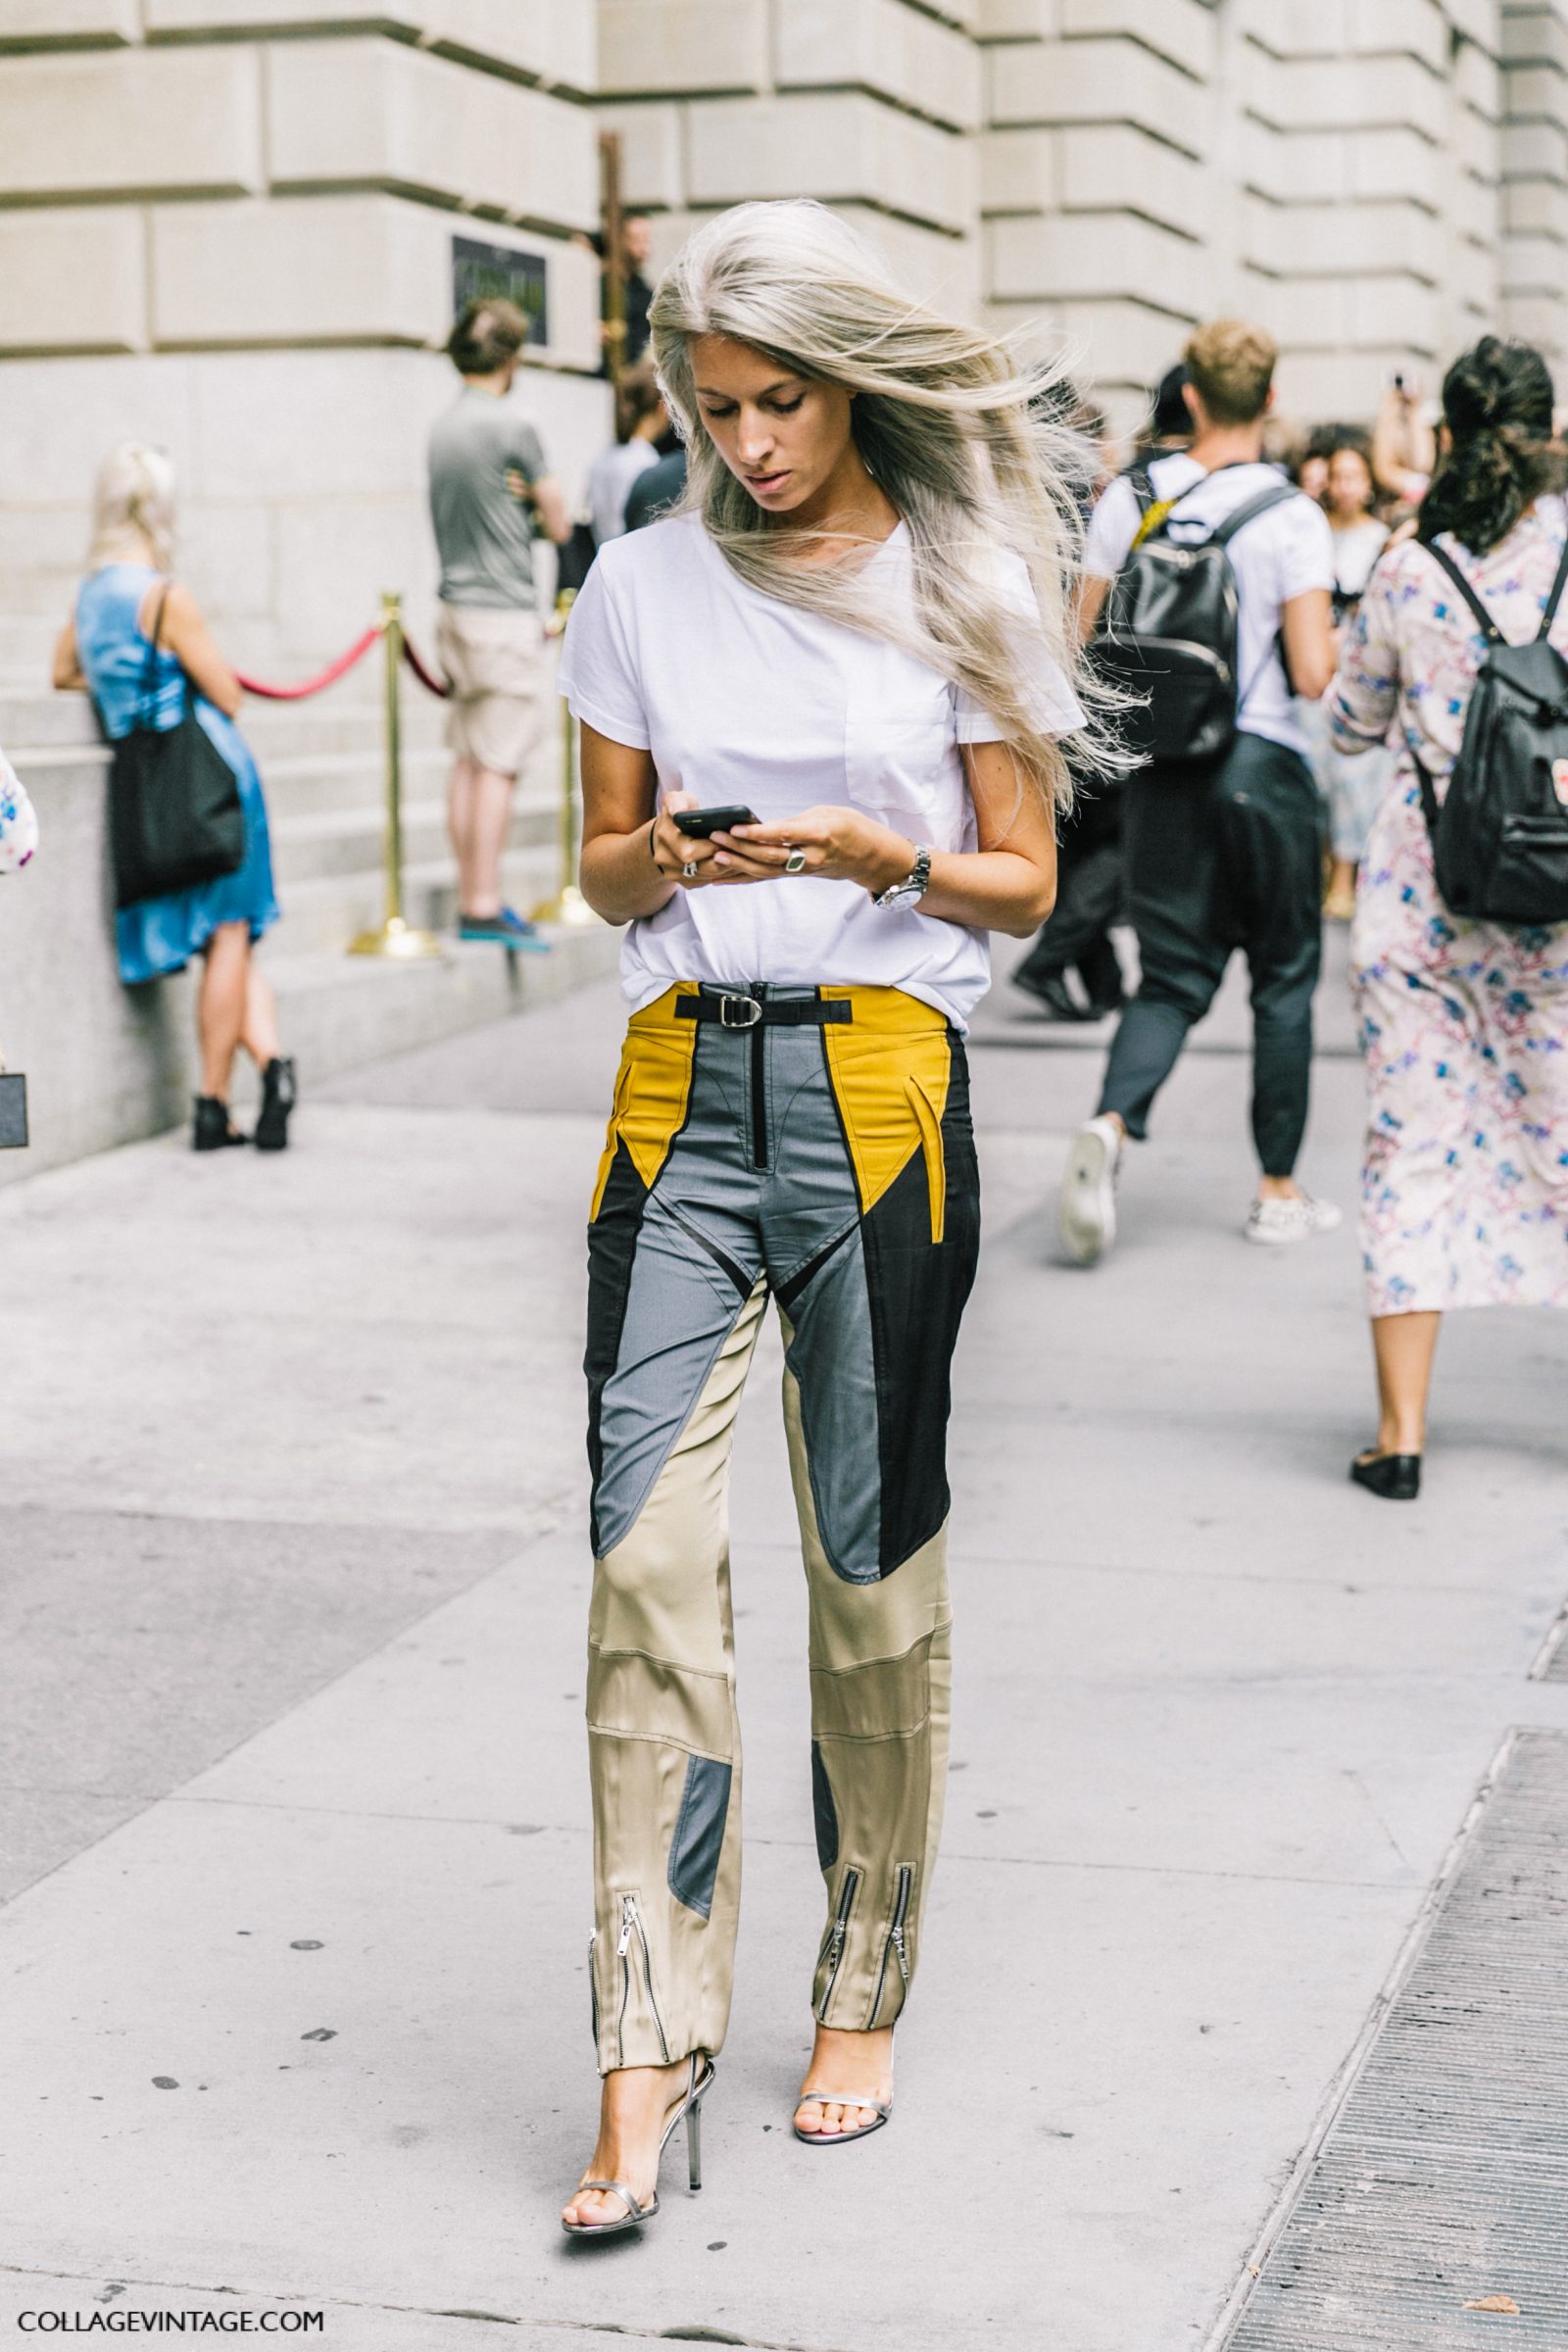 nyfw-new_york_fashion_week_ss17-street_style-outfits-collage_vintage-vintage-victoria_beckham-6